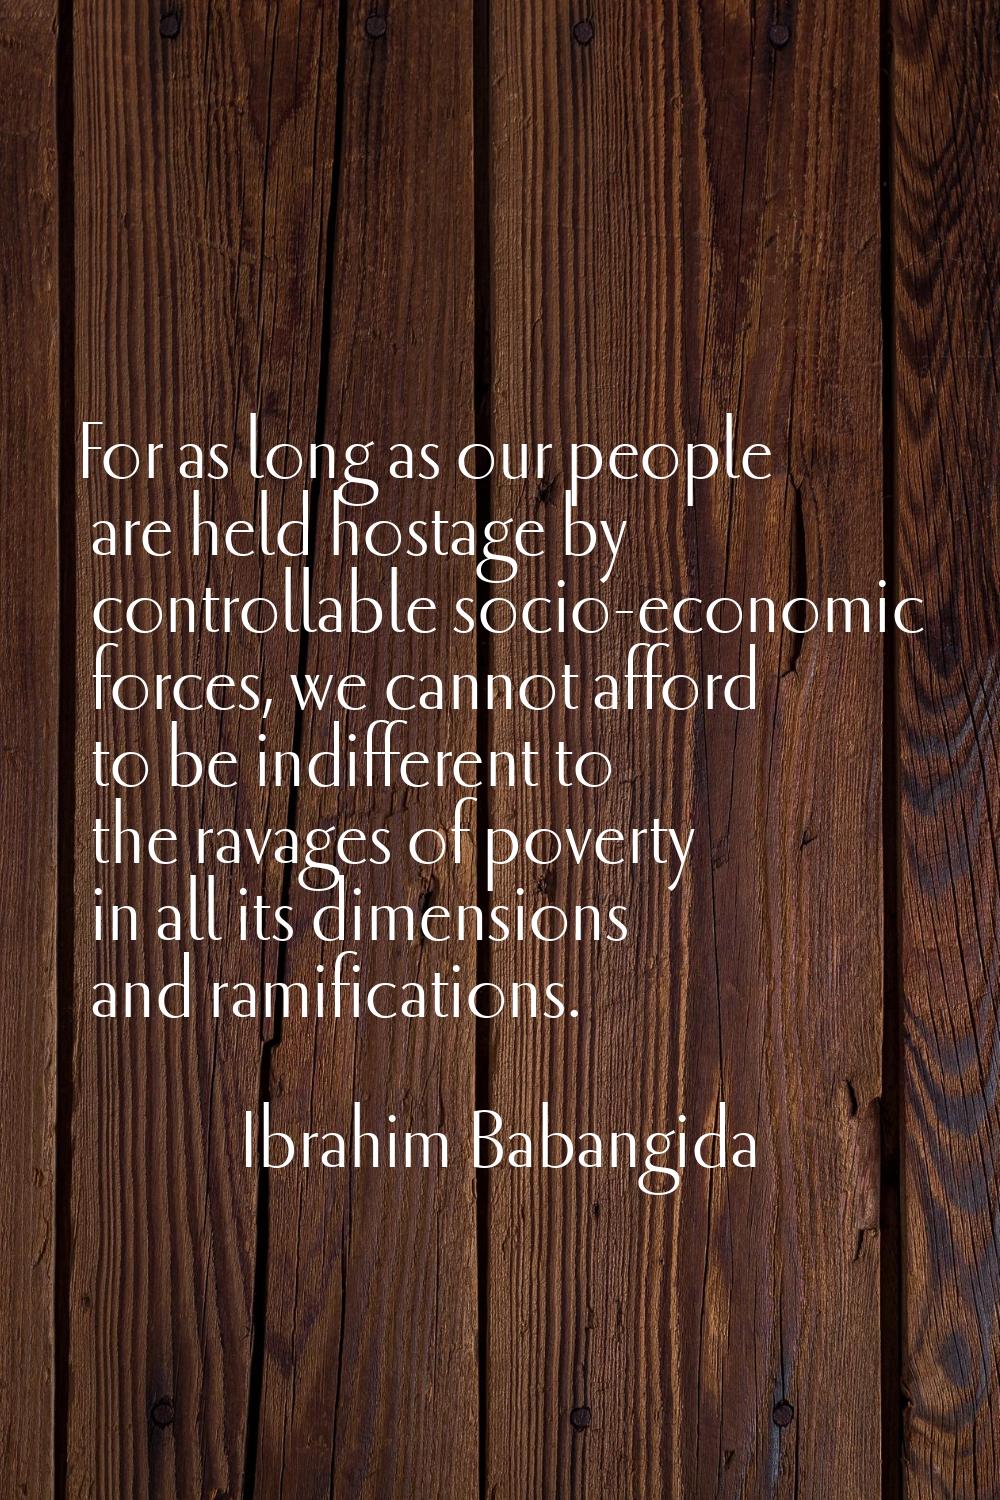 For as long as our people are held hostage by controllable socio-economic forces, we cannot afford 